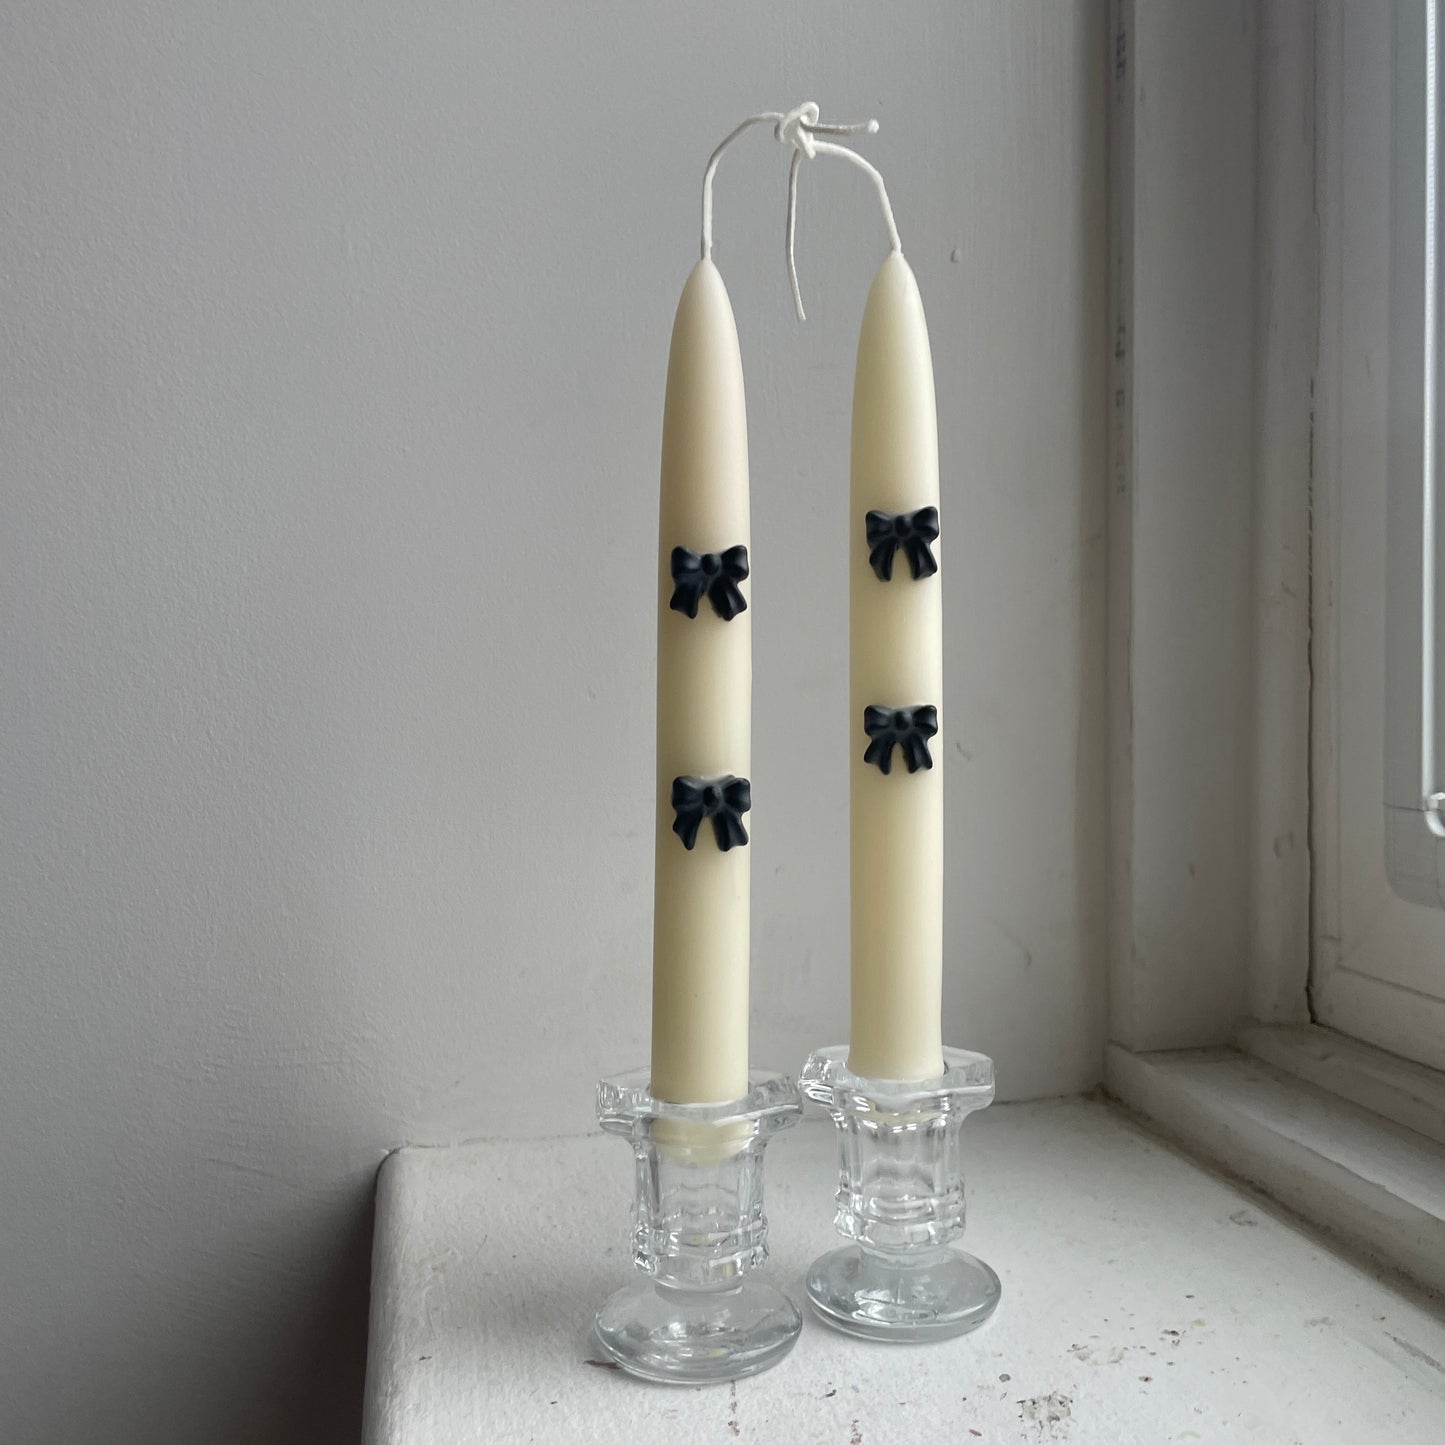 Ribbon Bows Beeswax Tapers - Pair of 2 // Tapers, Bows, Candles, Beeswax, Black and White